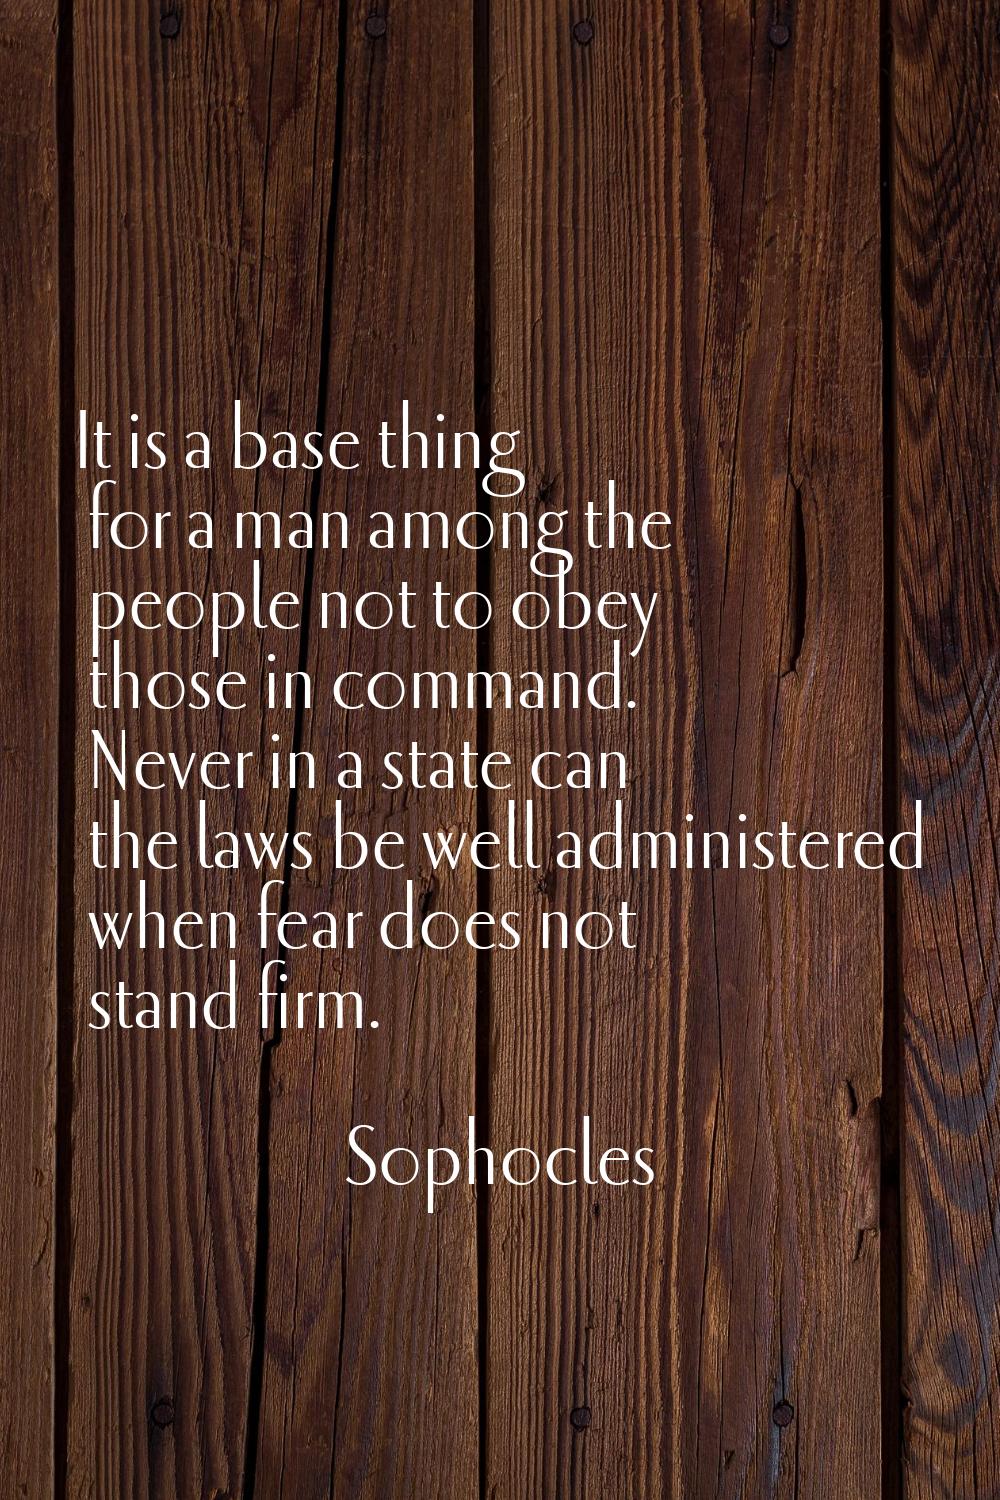 It is a base thing for a man among the people not to obey those in command. Never in a state can th